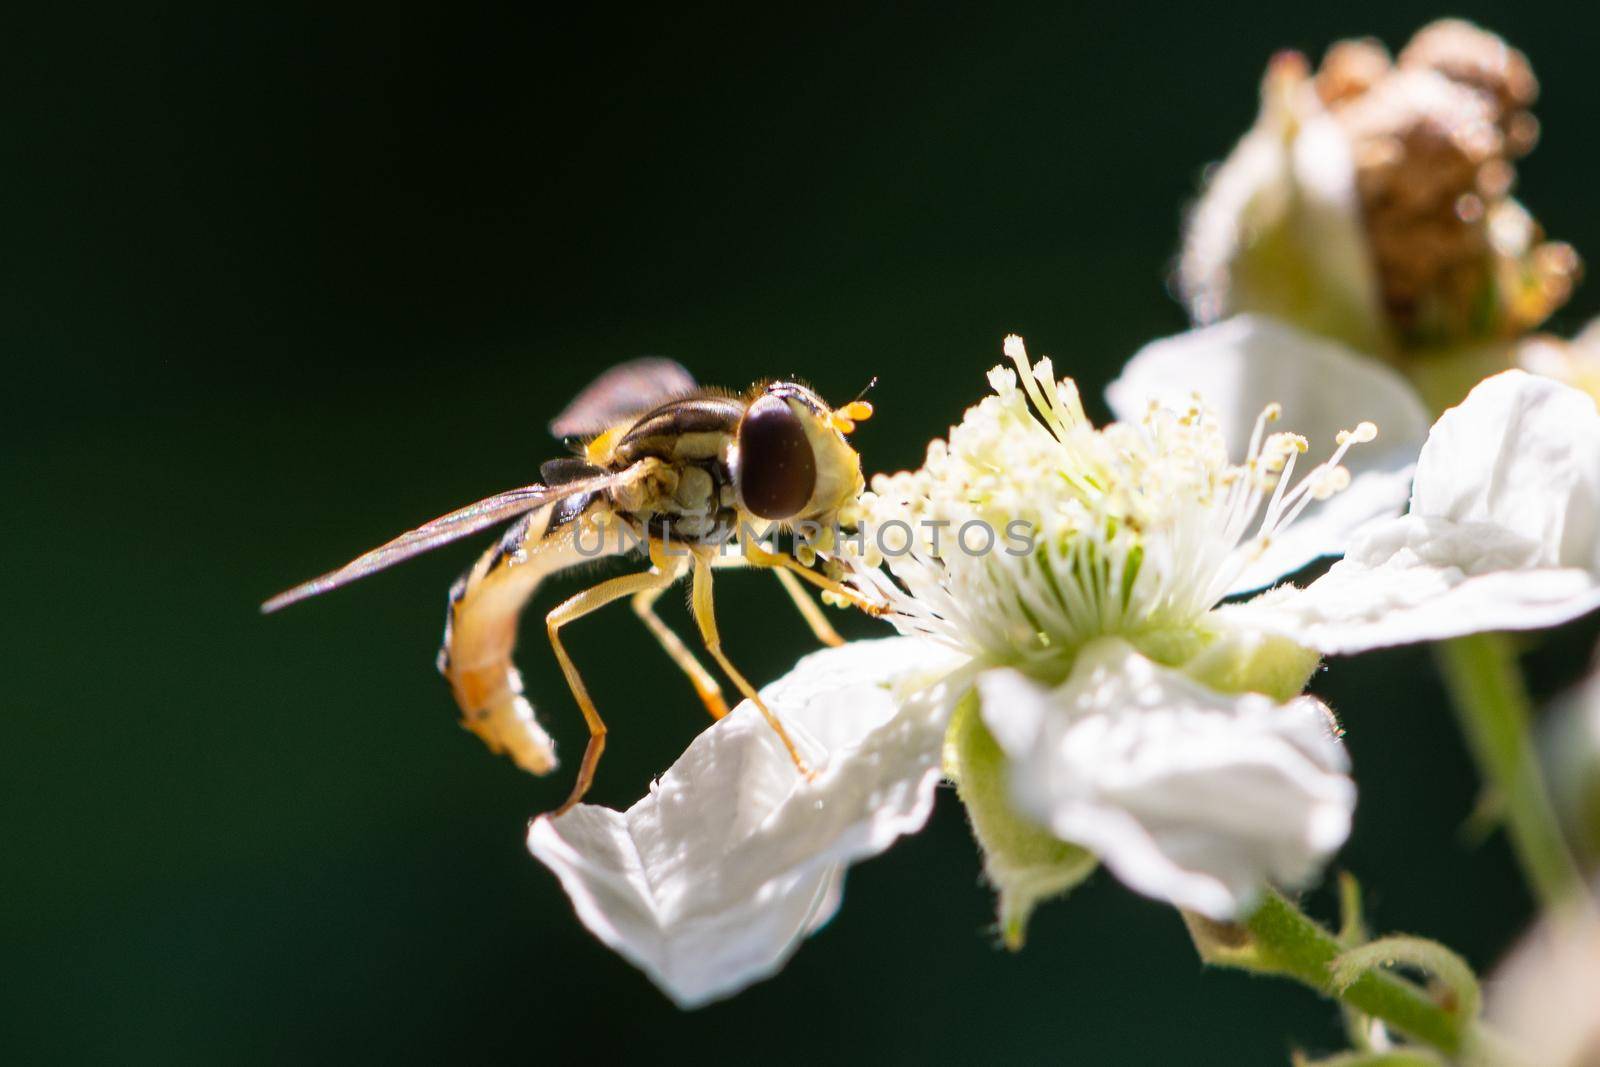 Hoverfly is laying on a white flower, image with a dark background by brambillasimone